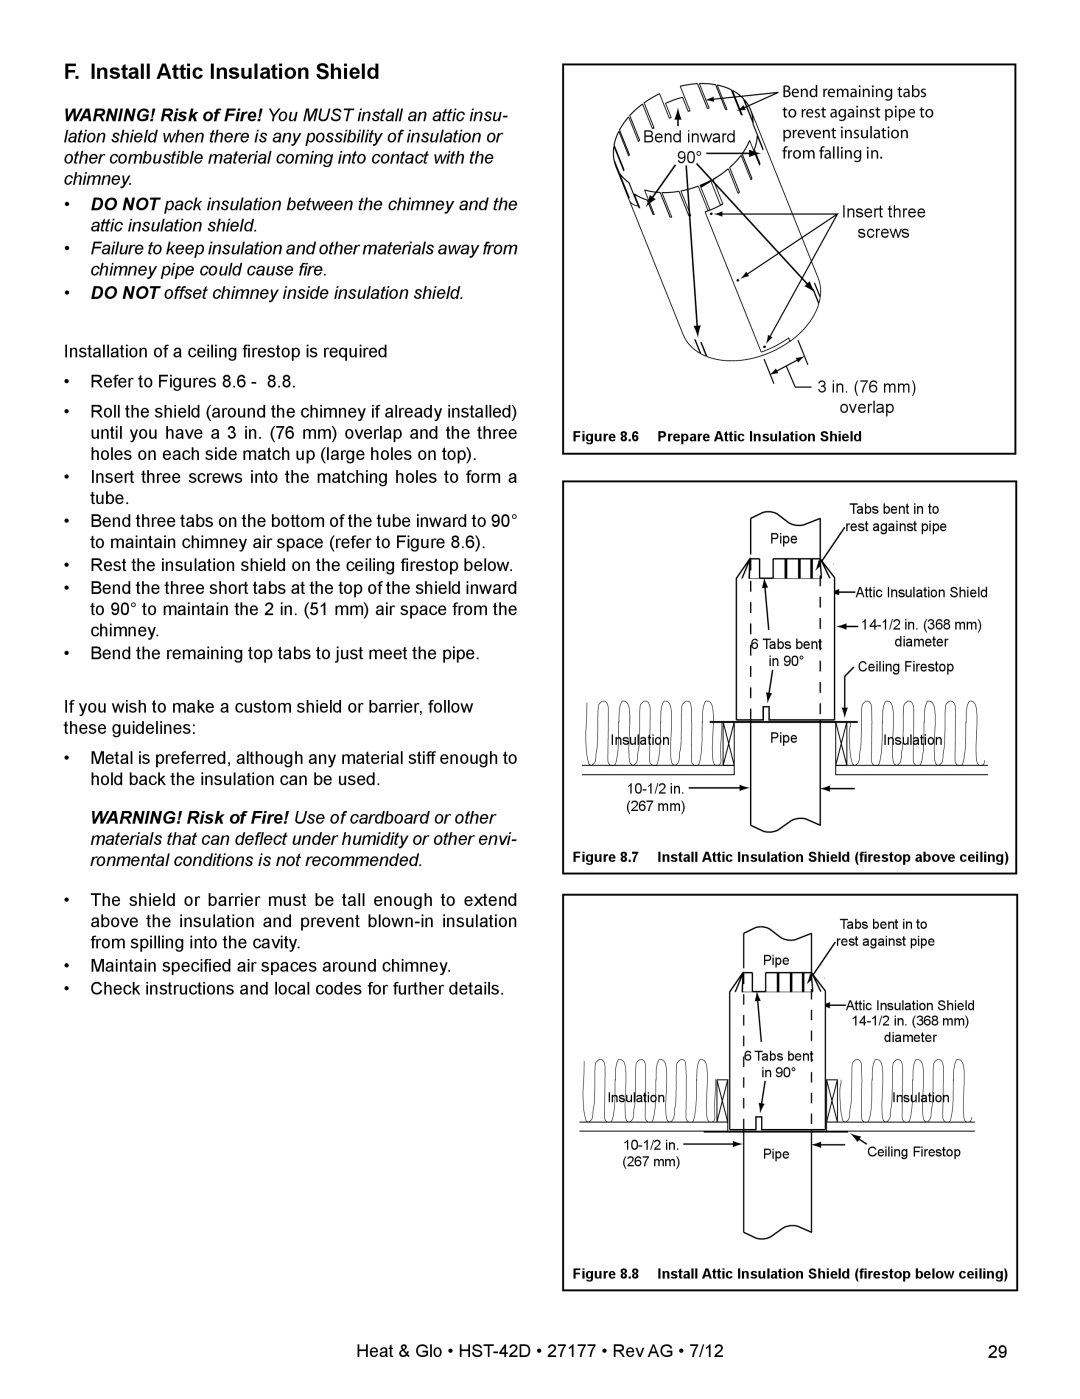 Heat & Glo LifeStyle HST-42D owner manual F. Install Attic Insulation Shield 